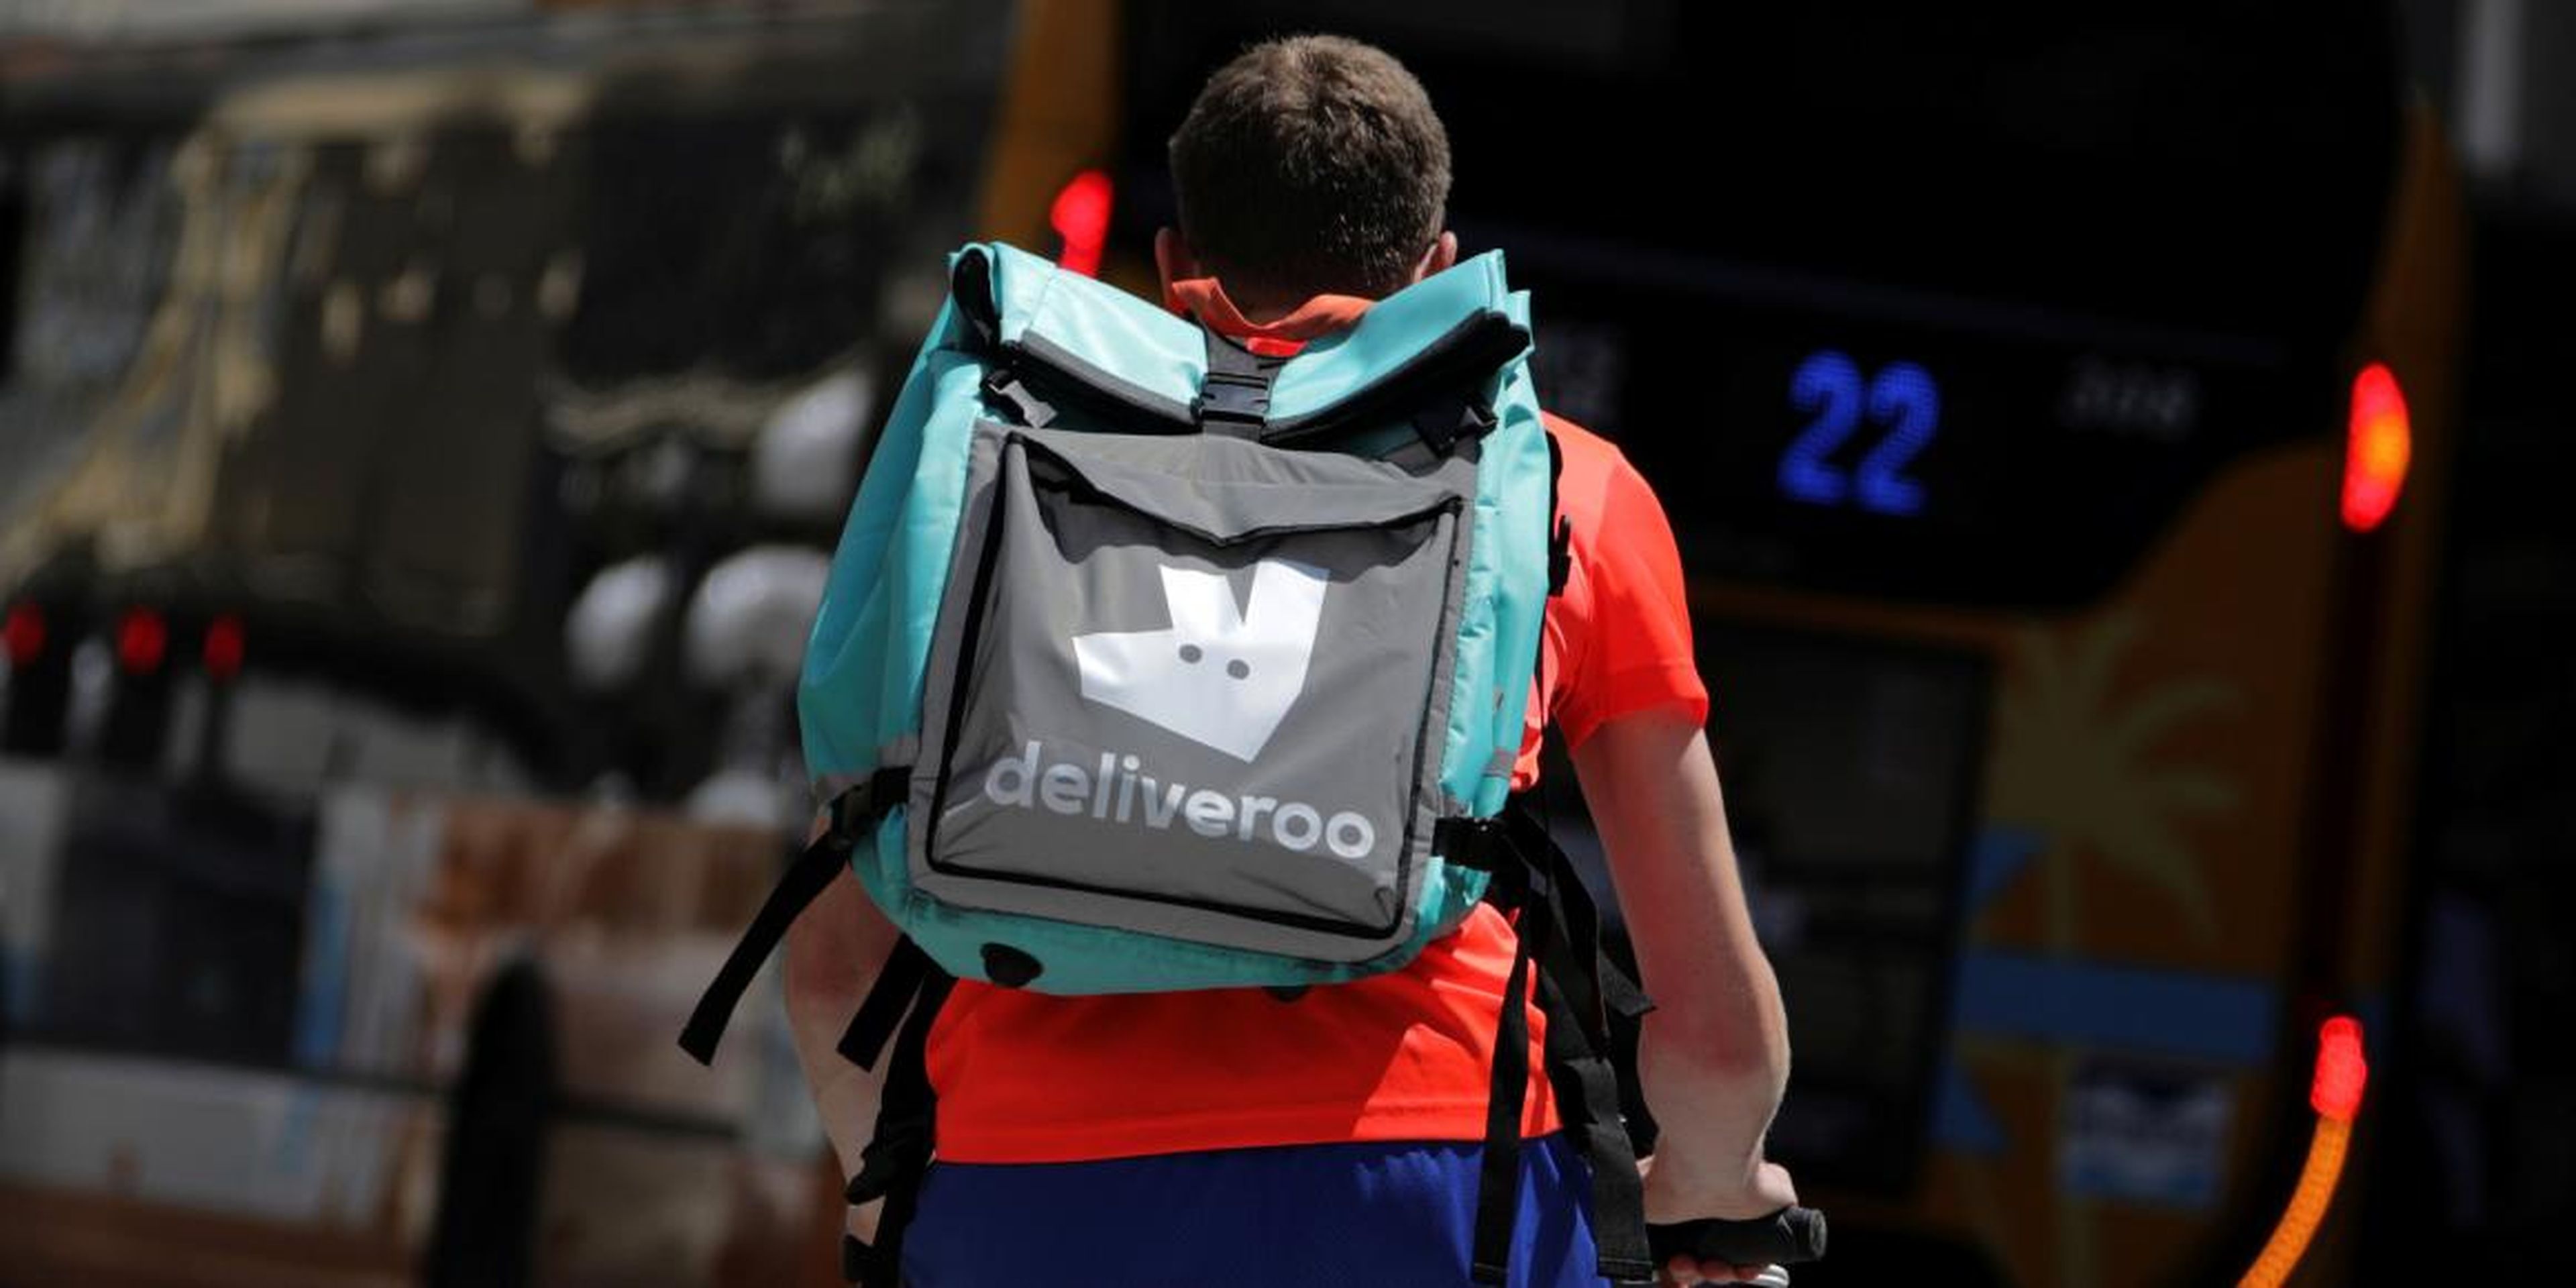 Amazon's Deliveroo investment is a bad sign for Uber — shares of an Uber Eats rival are tanking